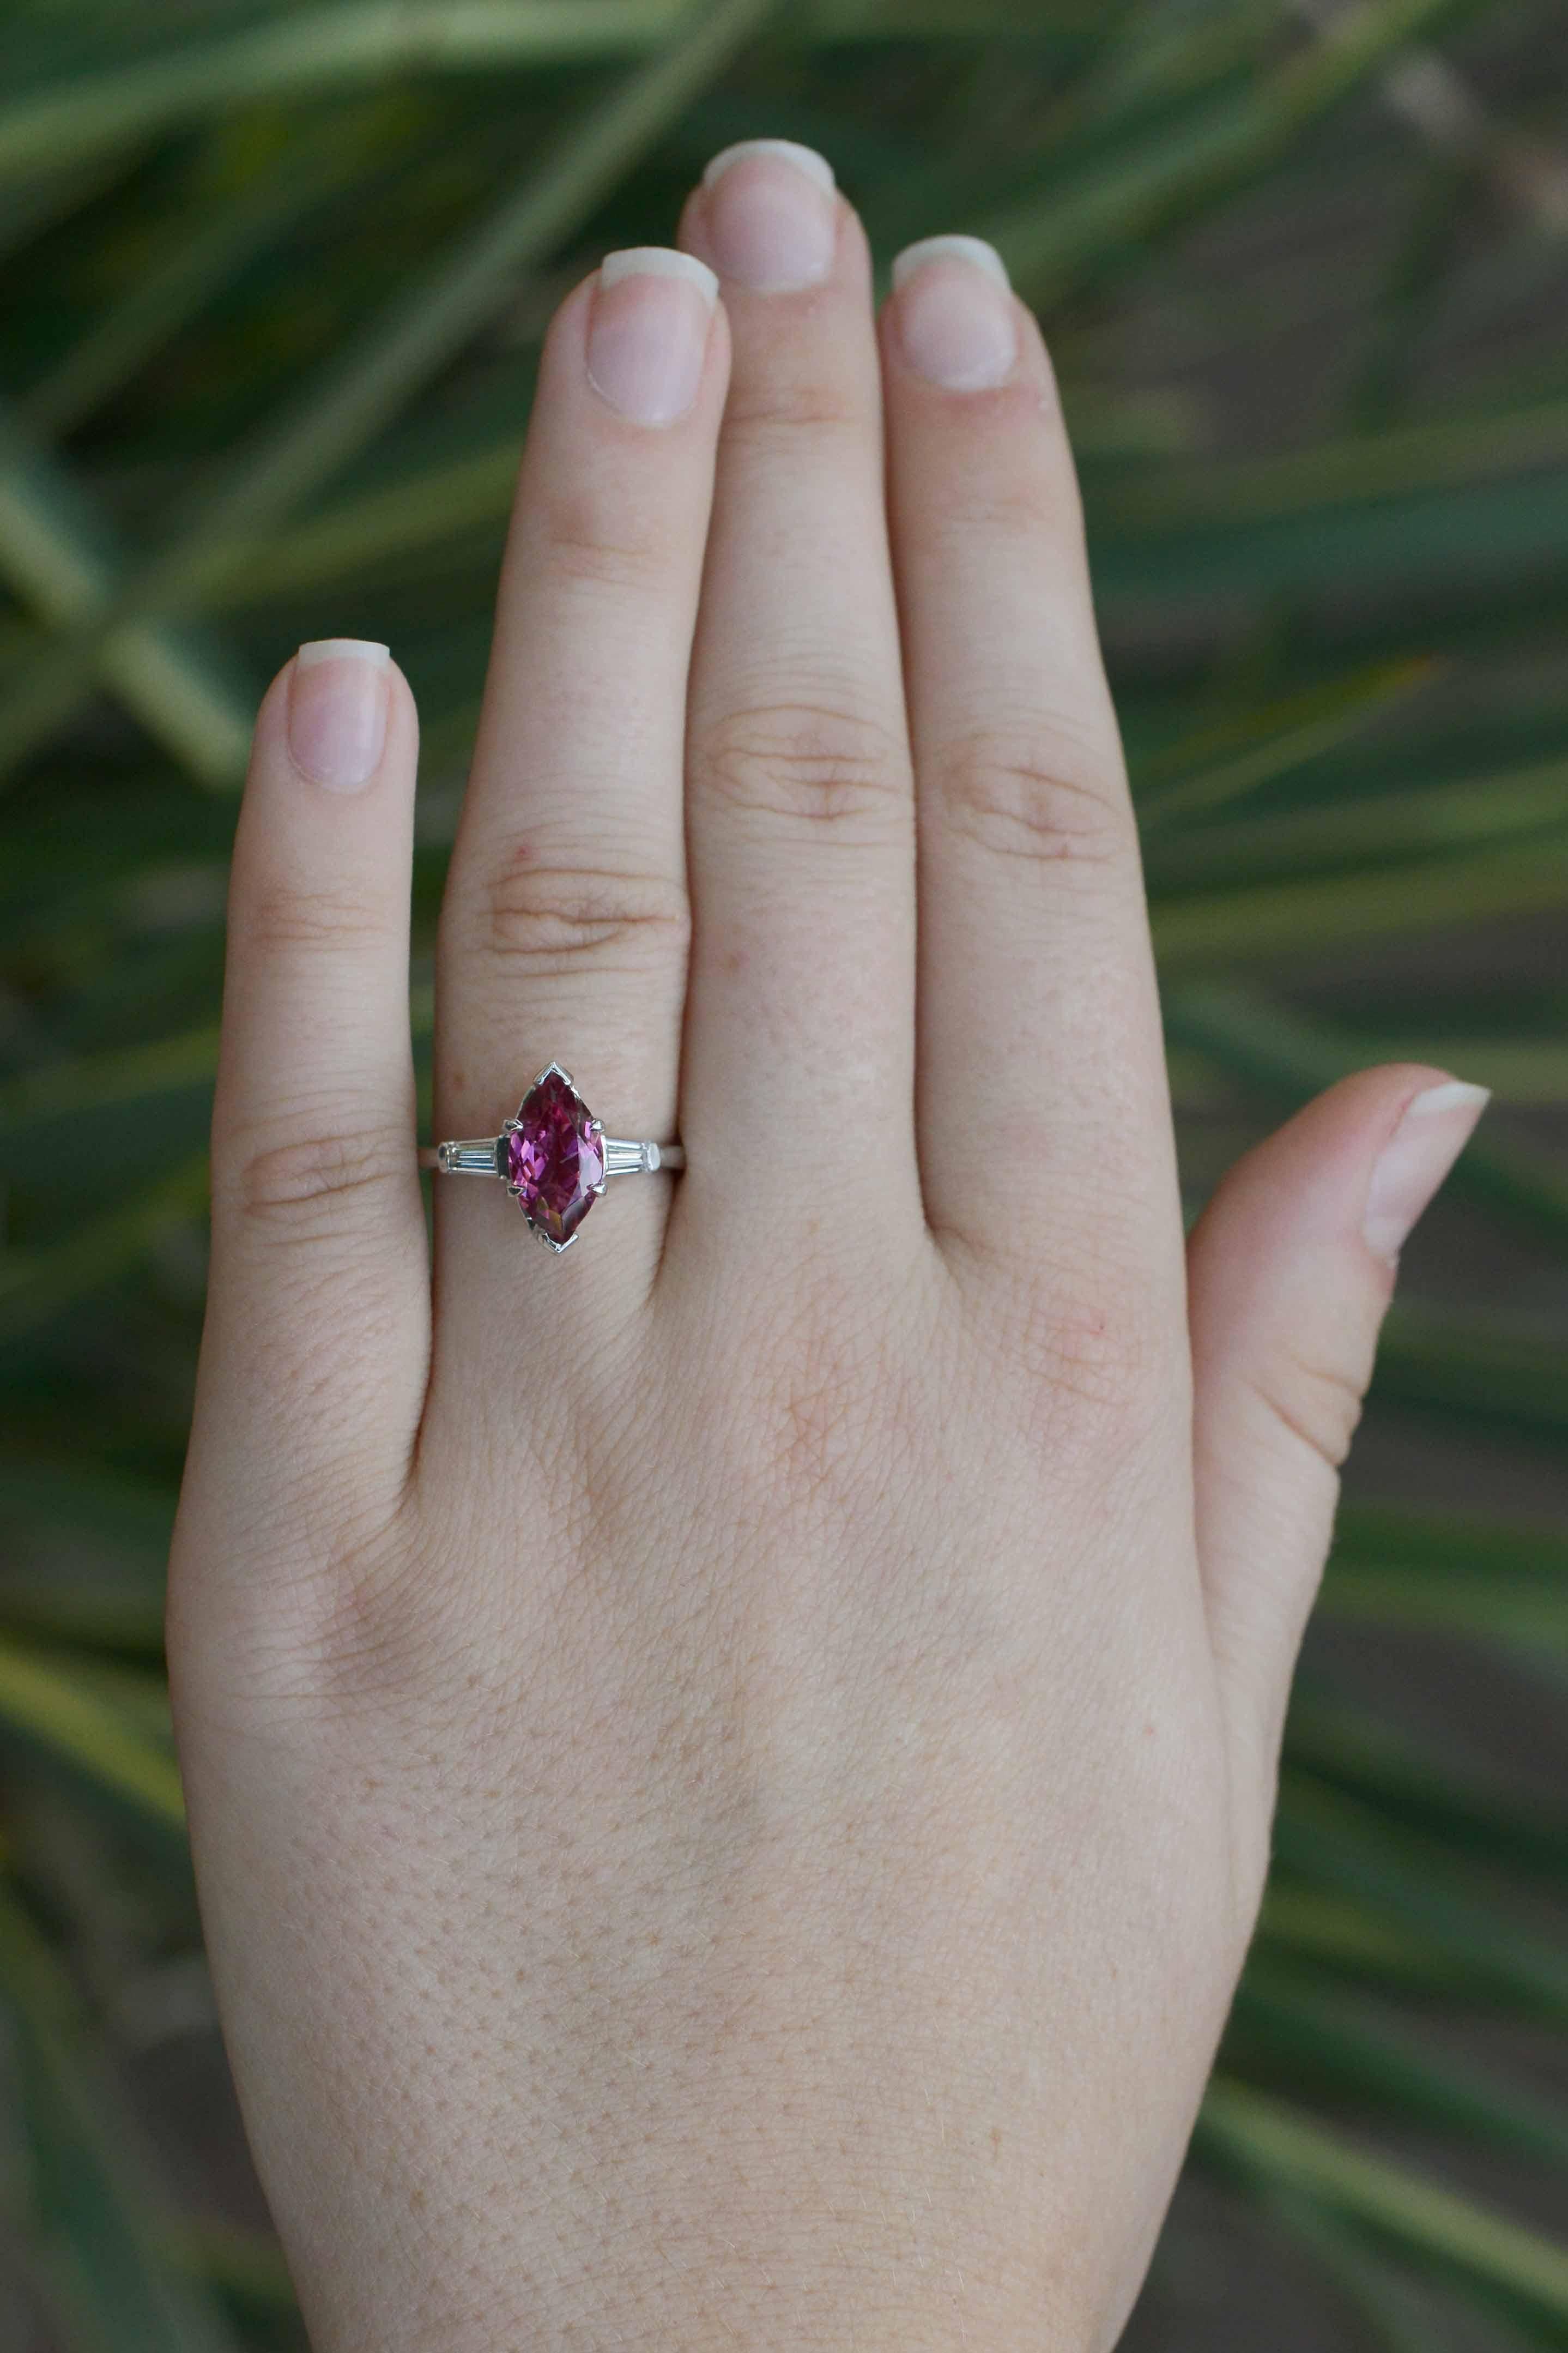 This antique engagement ring presents an attractive reddish pink tourmaline. Although it is uncommon to see a marquise cut colored gemstone, it captures the light strikingly and makes this piece so special. Set in a classic Art Deco mount featuring